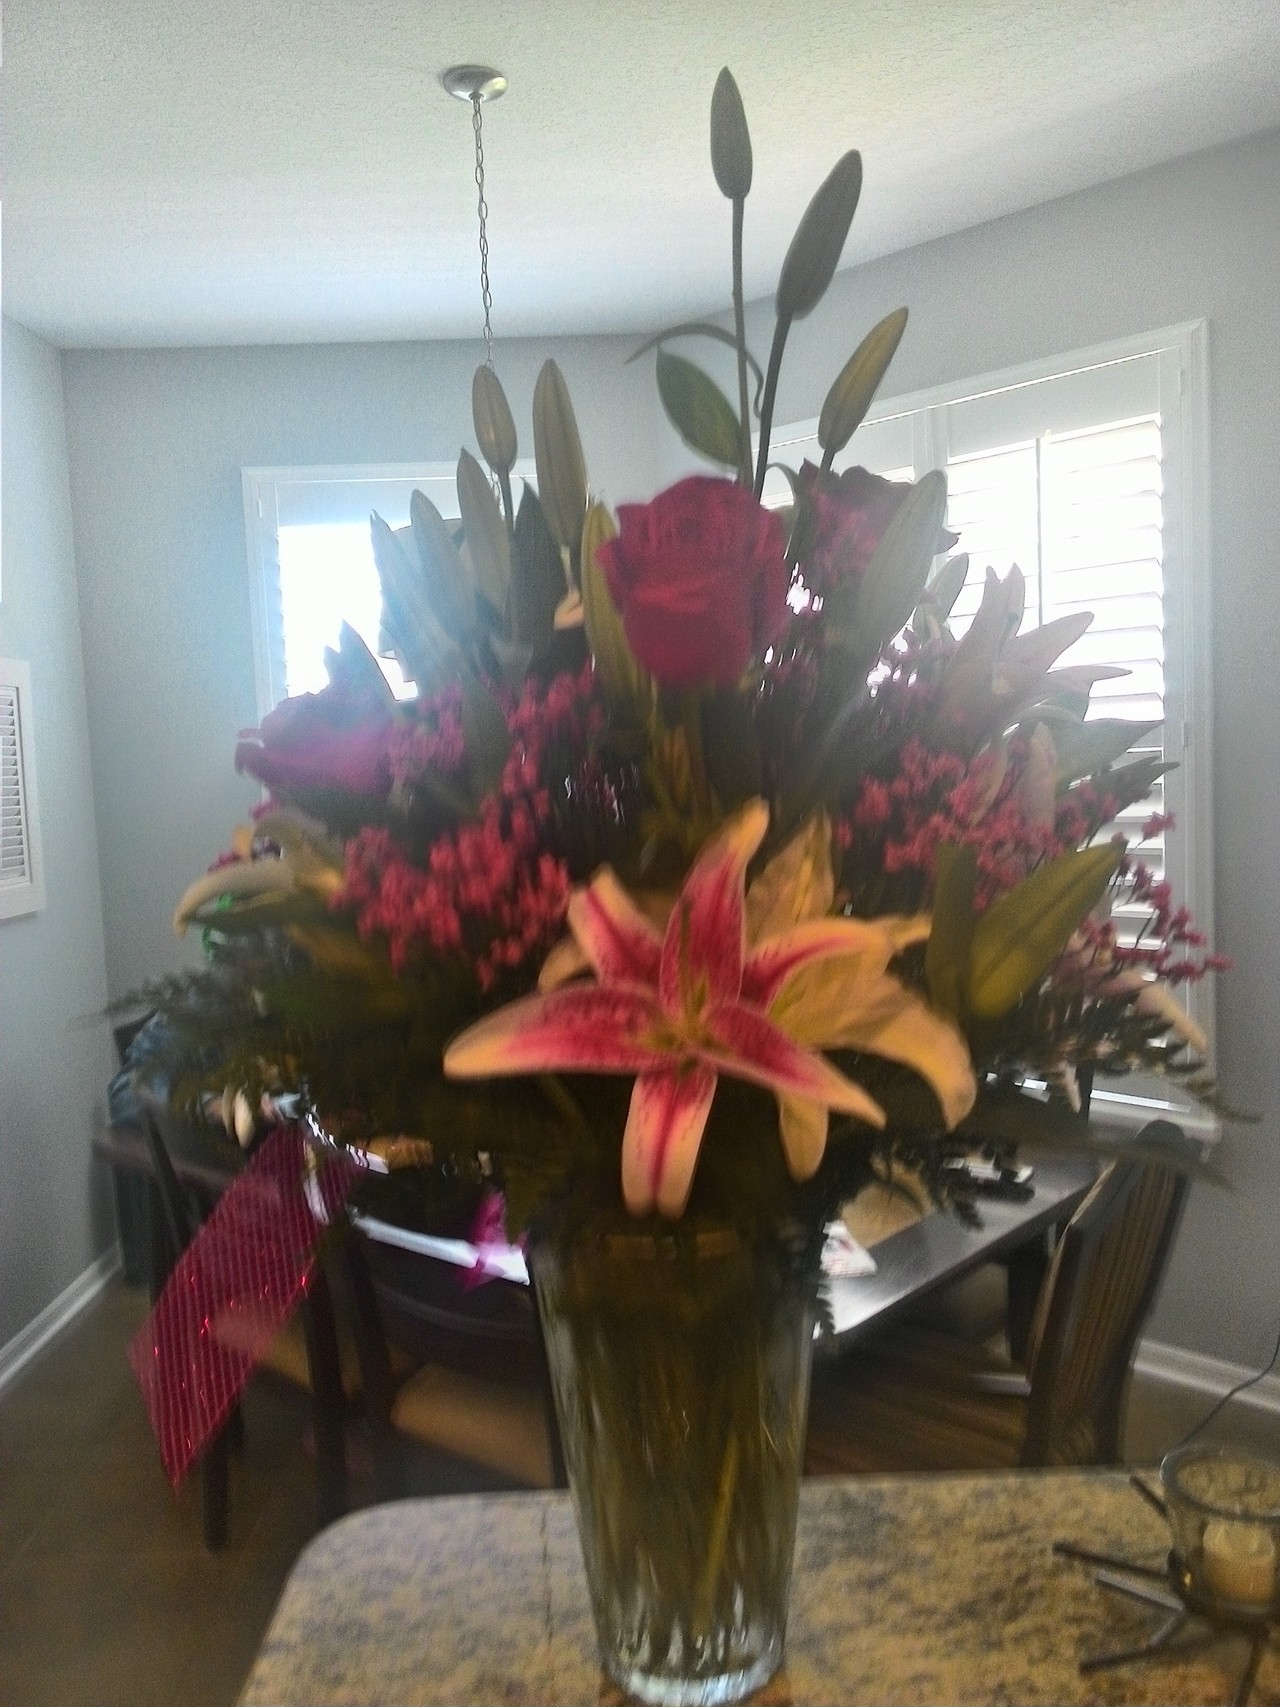 Amazingly gorgeous birthday flowers from my incredible Daddy, @celticknot65. They